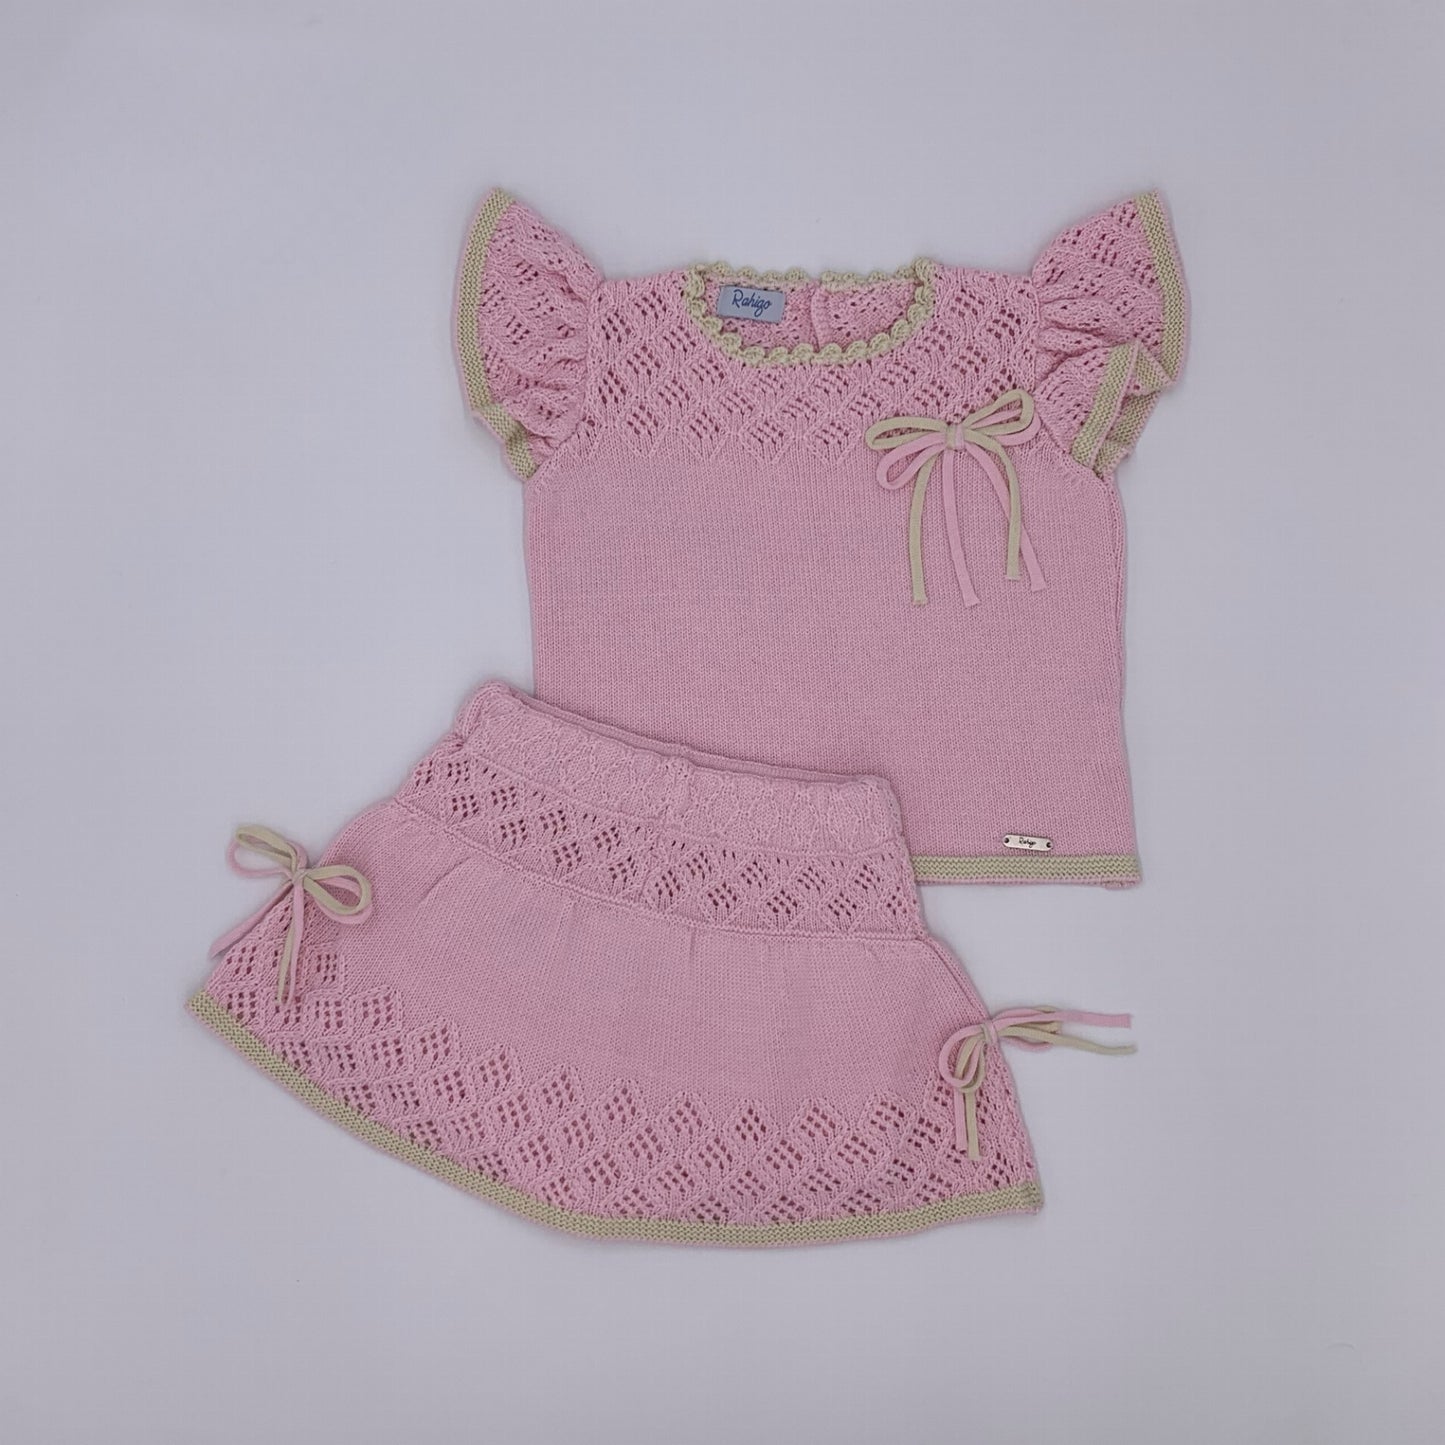 Load image into Gallery viewer, Pink and cream knitted skirt and jumper for girls by Rahigo - Adora
